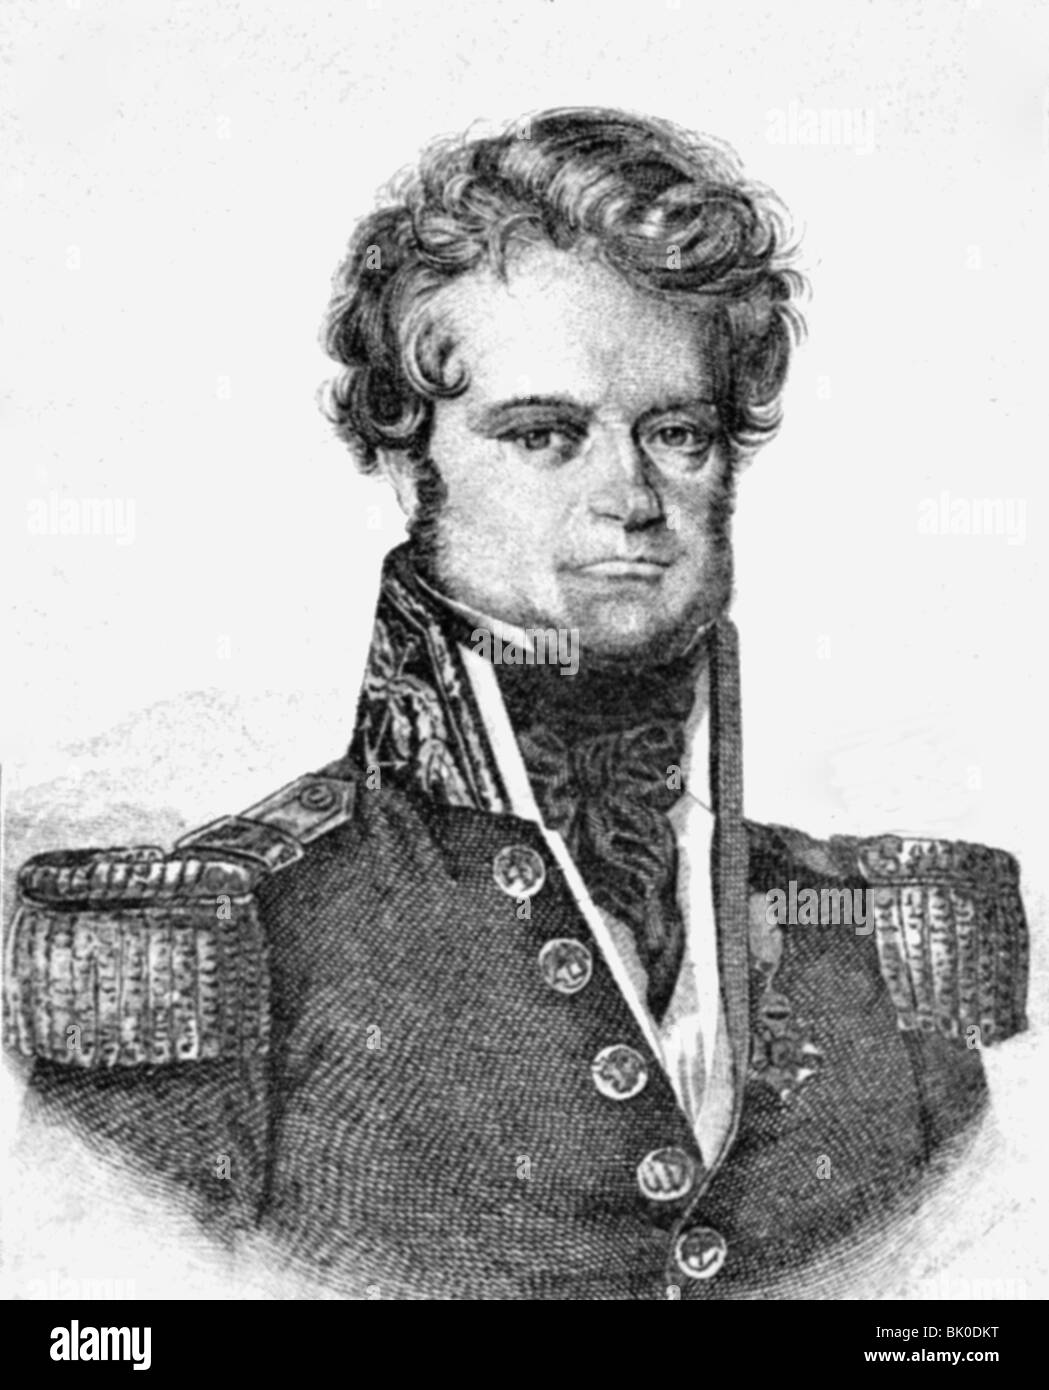 Dumont d' Urville, Jules, 23.5.1790 - 8.5.1842, French admiral and explorer, portrait, wood engraving, 19th century, , Stock Photo